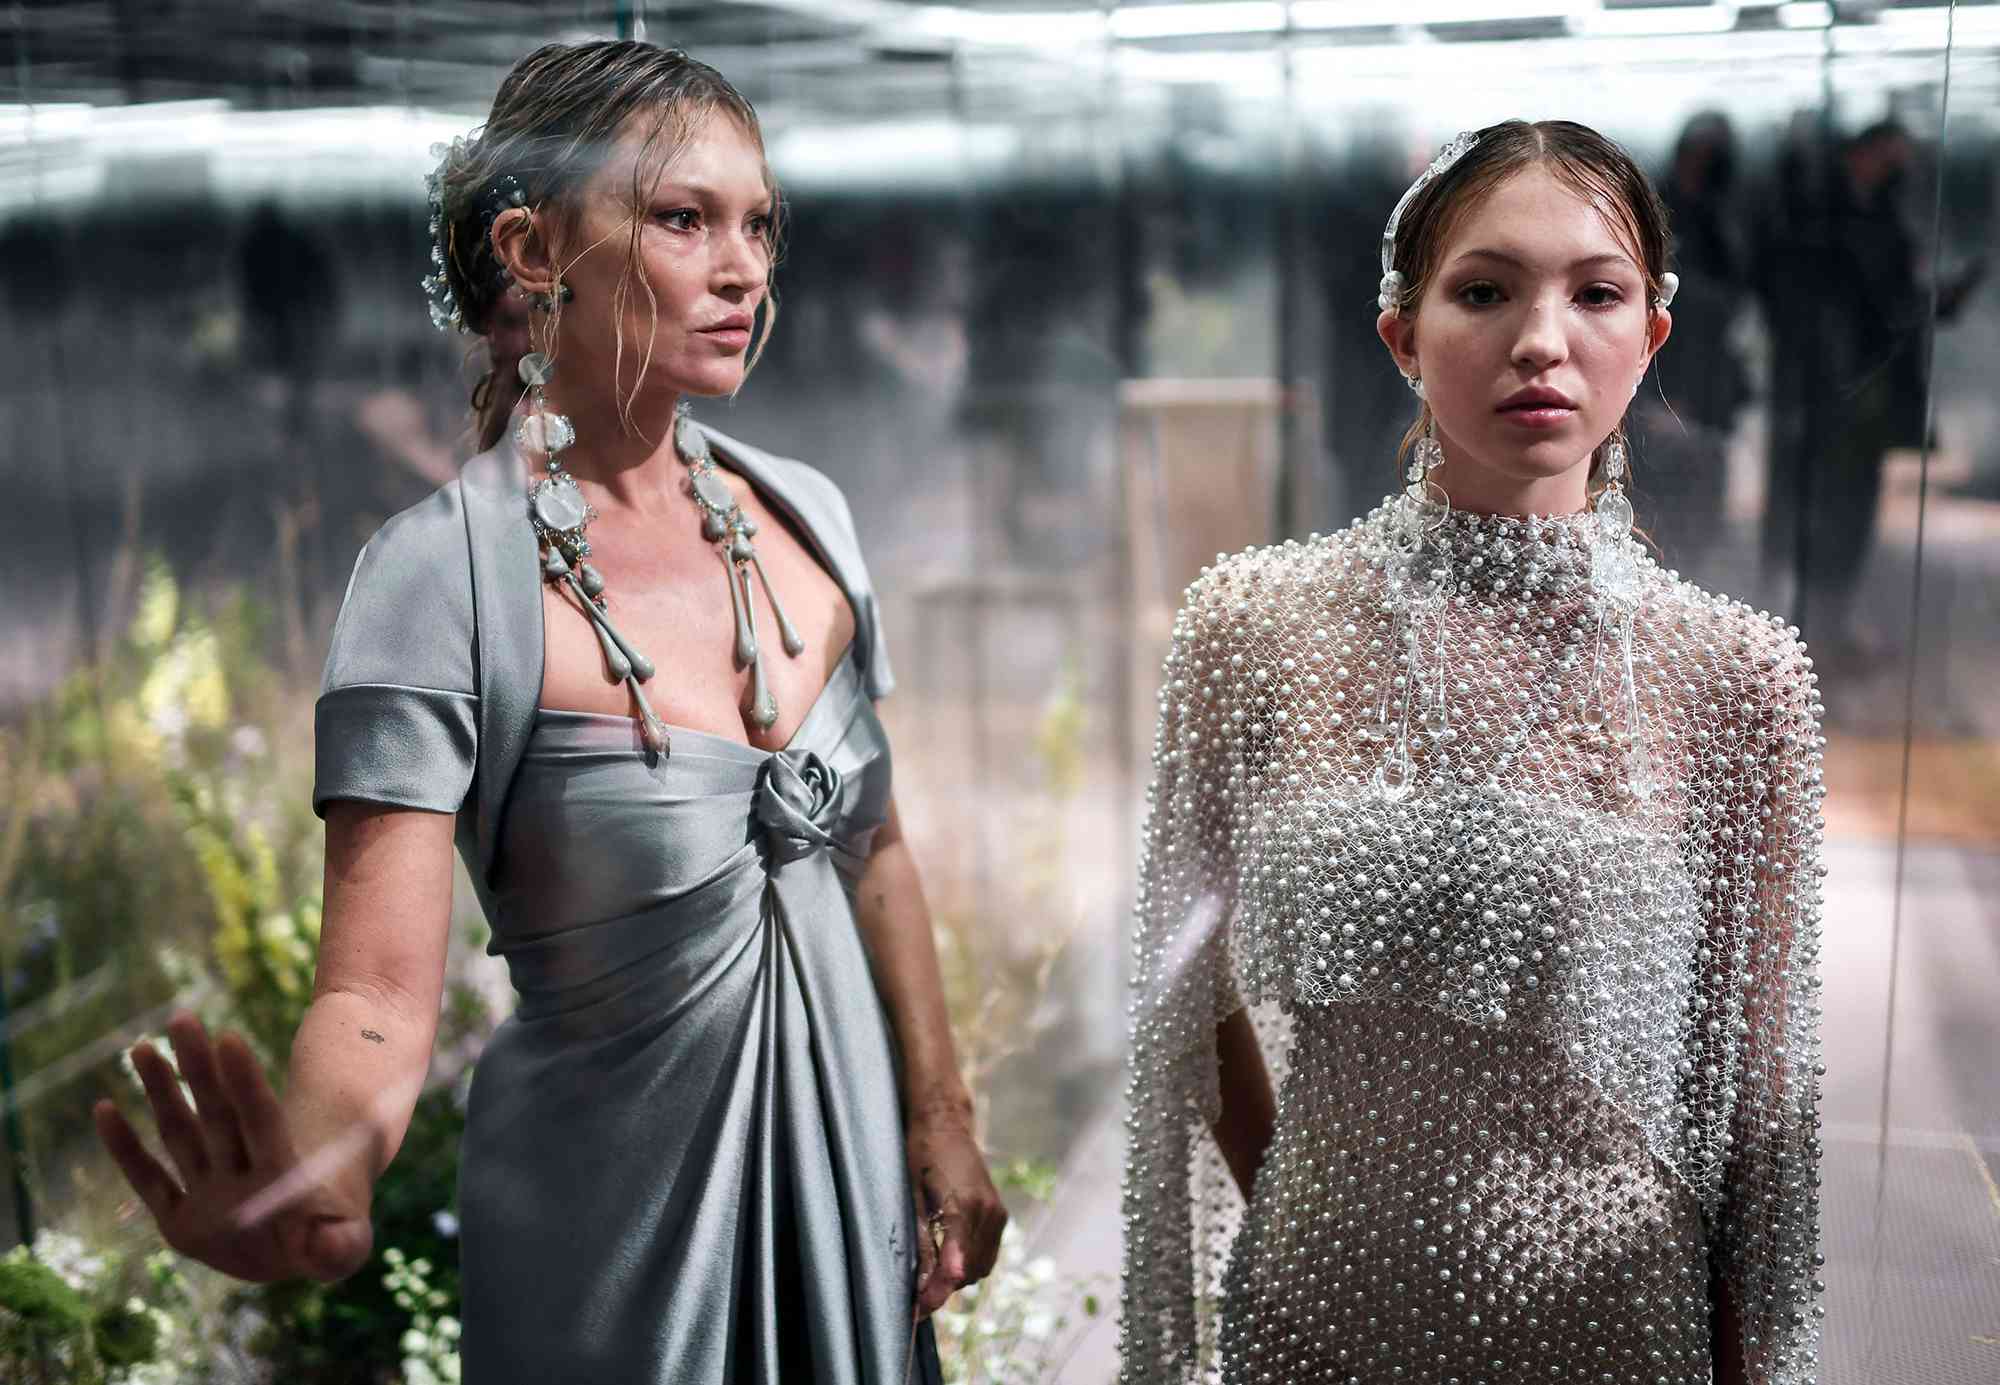 Kate Moss (L) and her daughter British model Lila Grace Moss-Hack present creations by British designer Kim Jones for Fendi's Spring-Summer 2021 collection during the Paris Haute Couture Fashion Week in Paris, on January 27, 2021.